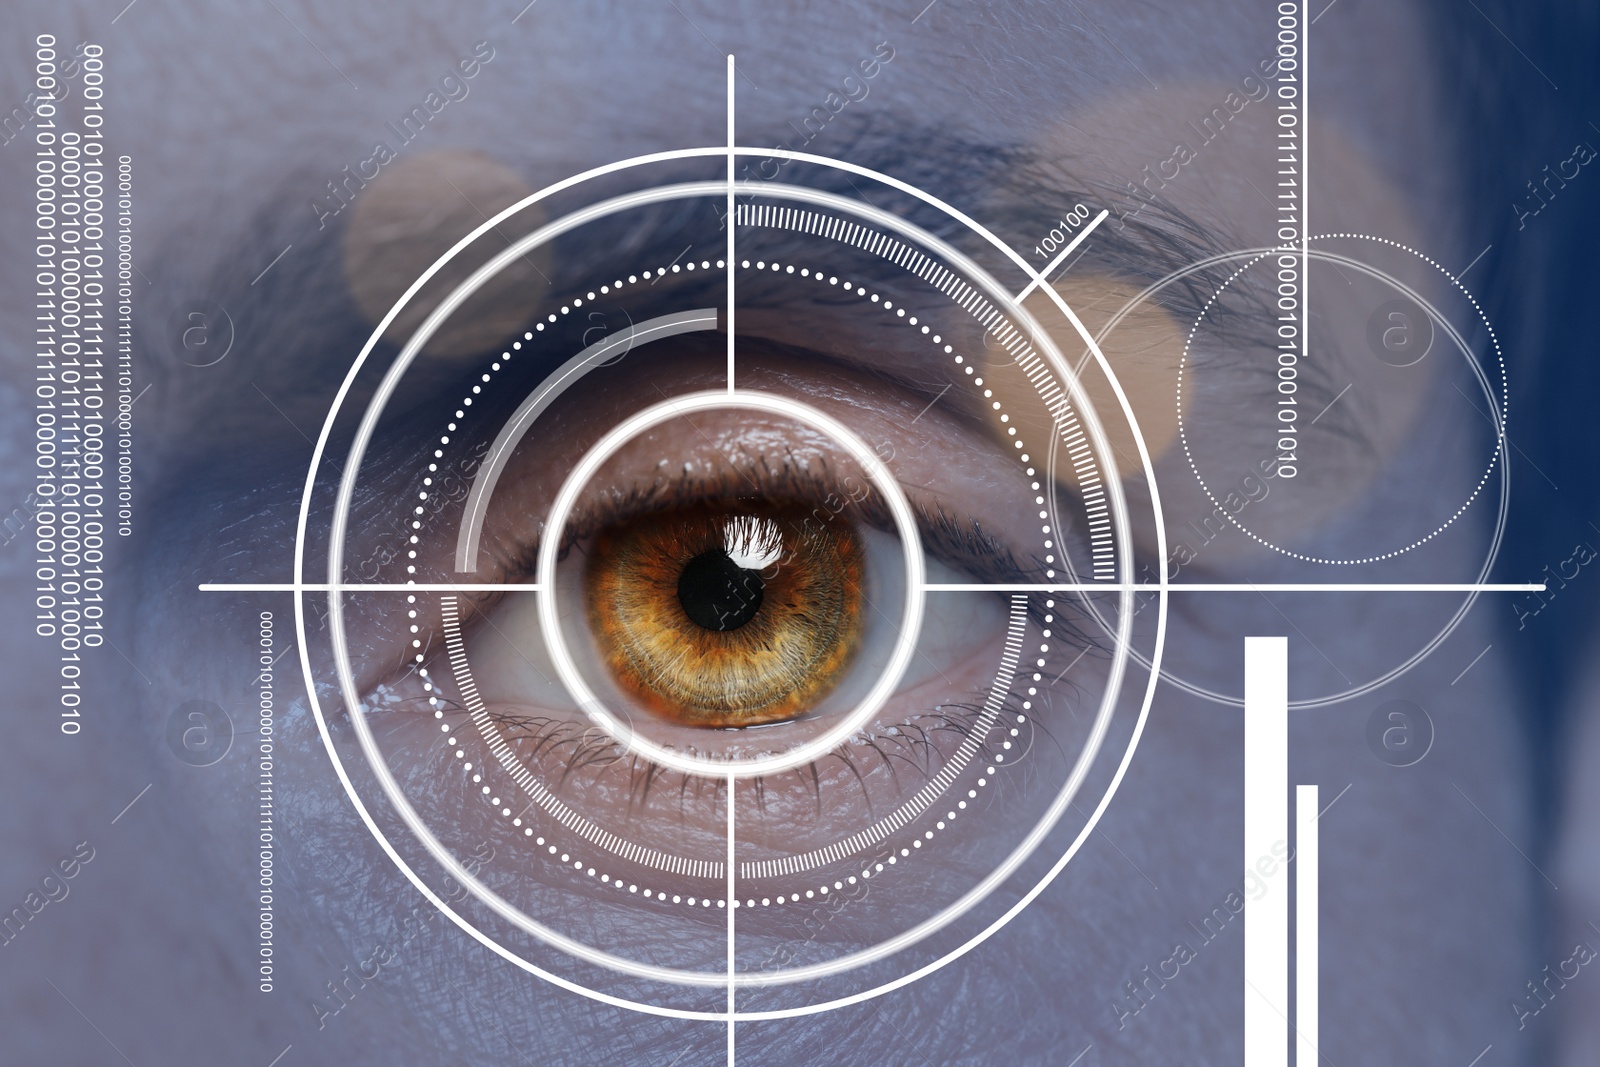 Image of Closeup view of man in process of scanning, focus on eye